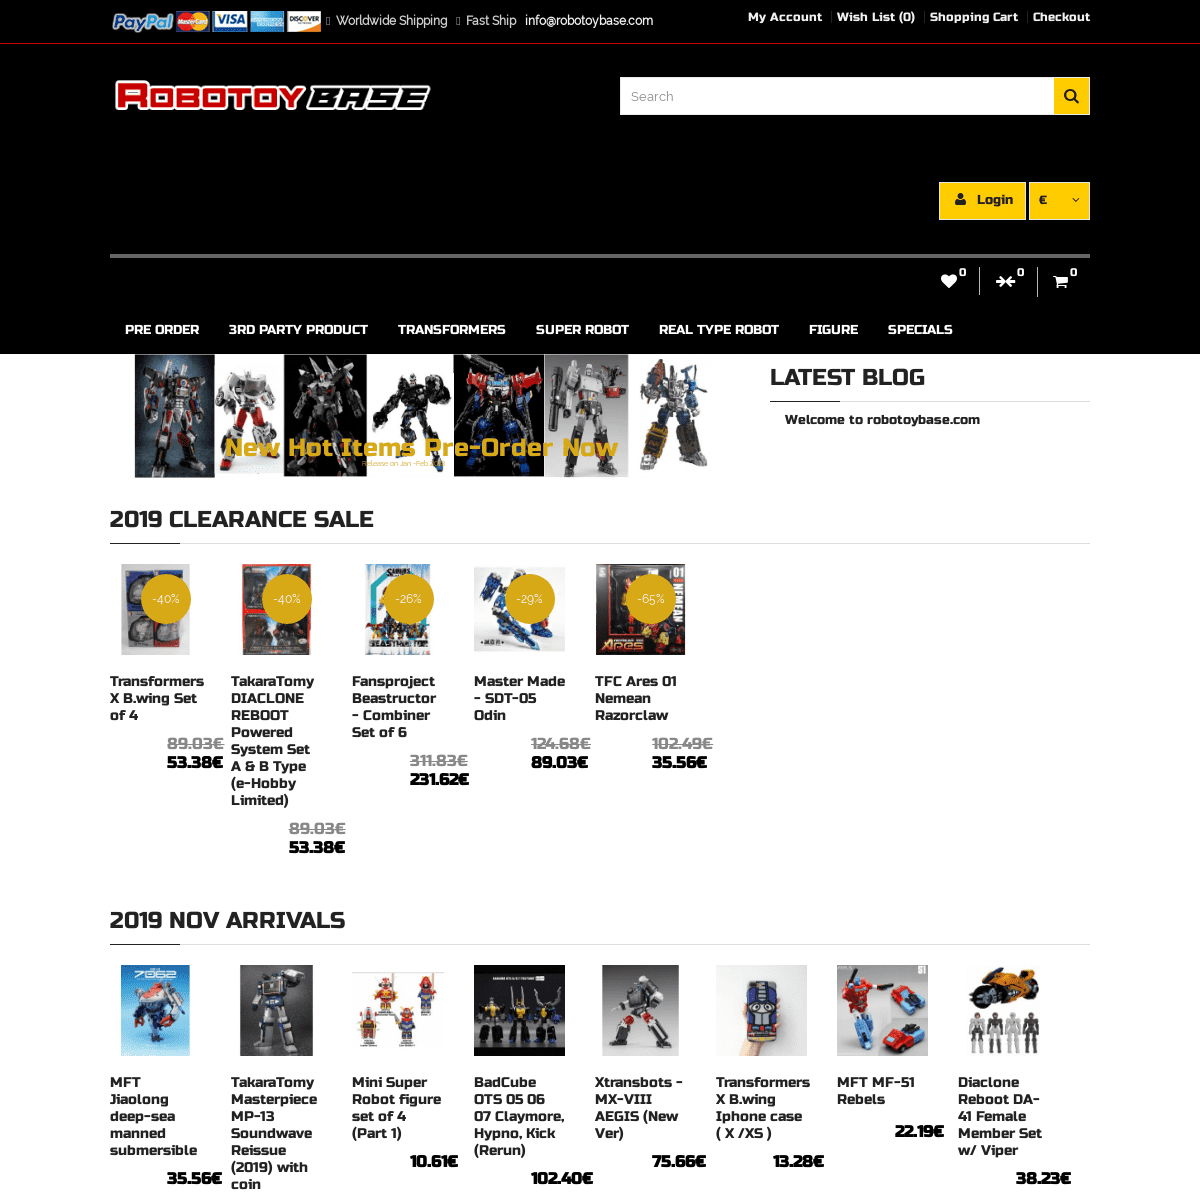 A complete backup of robotoybase.com